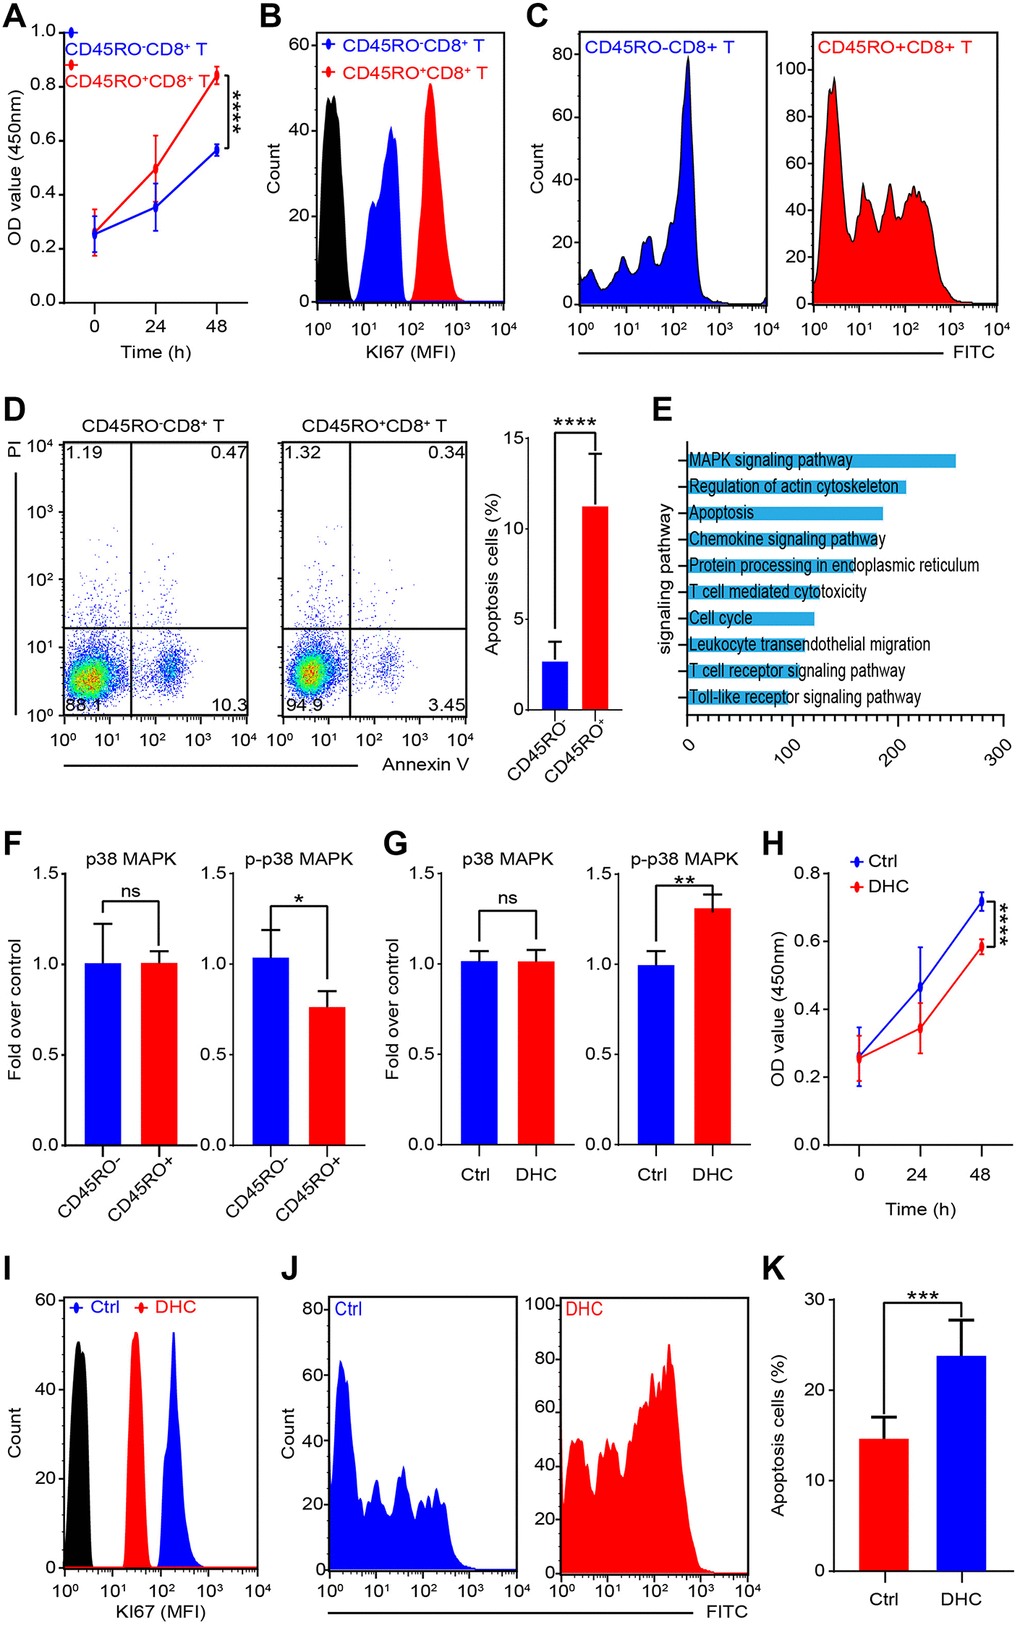 MAPK signaling promotes proliferation and inhibits apoptosis of CD45RO+CD8+T cells. CD45RO+CD8+T cells and CD45RO-CD8+T cells were sorted by flow cytometry. (A) Cell viability was tested by CCK8 assay at 0, 24 and 48 hours. (B) Ki67 fluorescence intensity of CD45RO+CD8+T cells and CD45RO-CD8+T cells were tested by flow cytometry. (C) Proliferation rate of CD45RO+CD8+T cells and CD45RO-CD8+T cells were tested by flow cytometry according to changes of CFSE fluorescence intensity. (D) Apoptosis status of CD45RO-CD8+T cells and CD45RO+CD8+T cells tested by flow cytometry with PI and Annexin V stanning (right) and apoptosis proportion rates were counted (right). (E) Clustering of differential genes between CD45RO-CD8+T cells and CD45RO+CD8+T cells. (F) Quantitative analysis of p38/MAPK and p-p38/MAPK of CD45RO+CD8+T cells and CD45RO-CD8+T cells. (G) p38/MAPK and p-p38/MAPK of CD45RO+CD8+T cells after dehydrocorydaline chloride treated for 48 hours. (H) Cell viability was tested by CCK8 assay at 0, 24 and 48 hours after dehydrocorydaline chloride treated. (I) Ki67 fluorescence intensity of CD45RO+CD8+T cells were tested by flow cytometry after treated by dehydrocorydaline chloride treated for 48 hours. (J) Proliferation rate of CD45RO+CD8+T cells were tested by flow cytometry according to changes of CFSE fluorescence intensity. (K) Proportion of apoptosis CD45RO+CD8+T cells after dehydrocorydaline chloride treated for 48 hours.